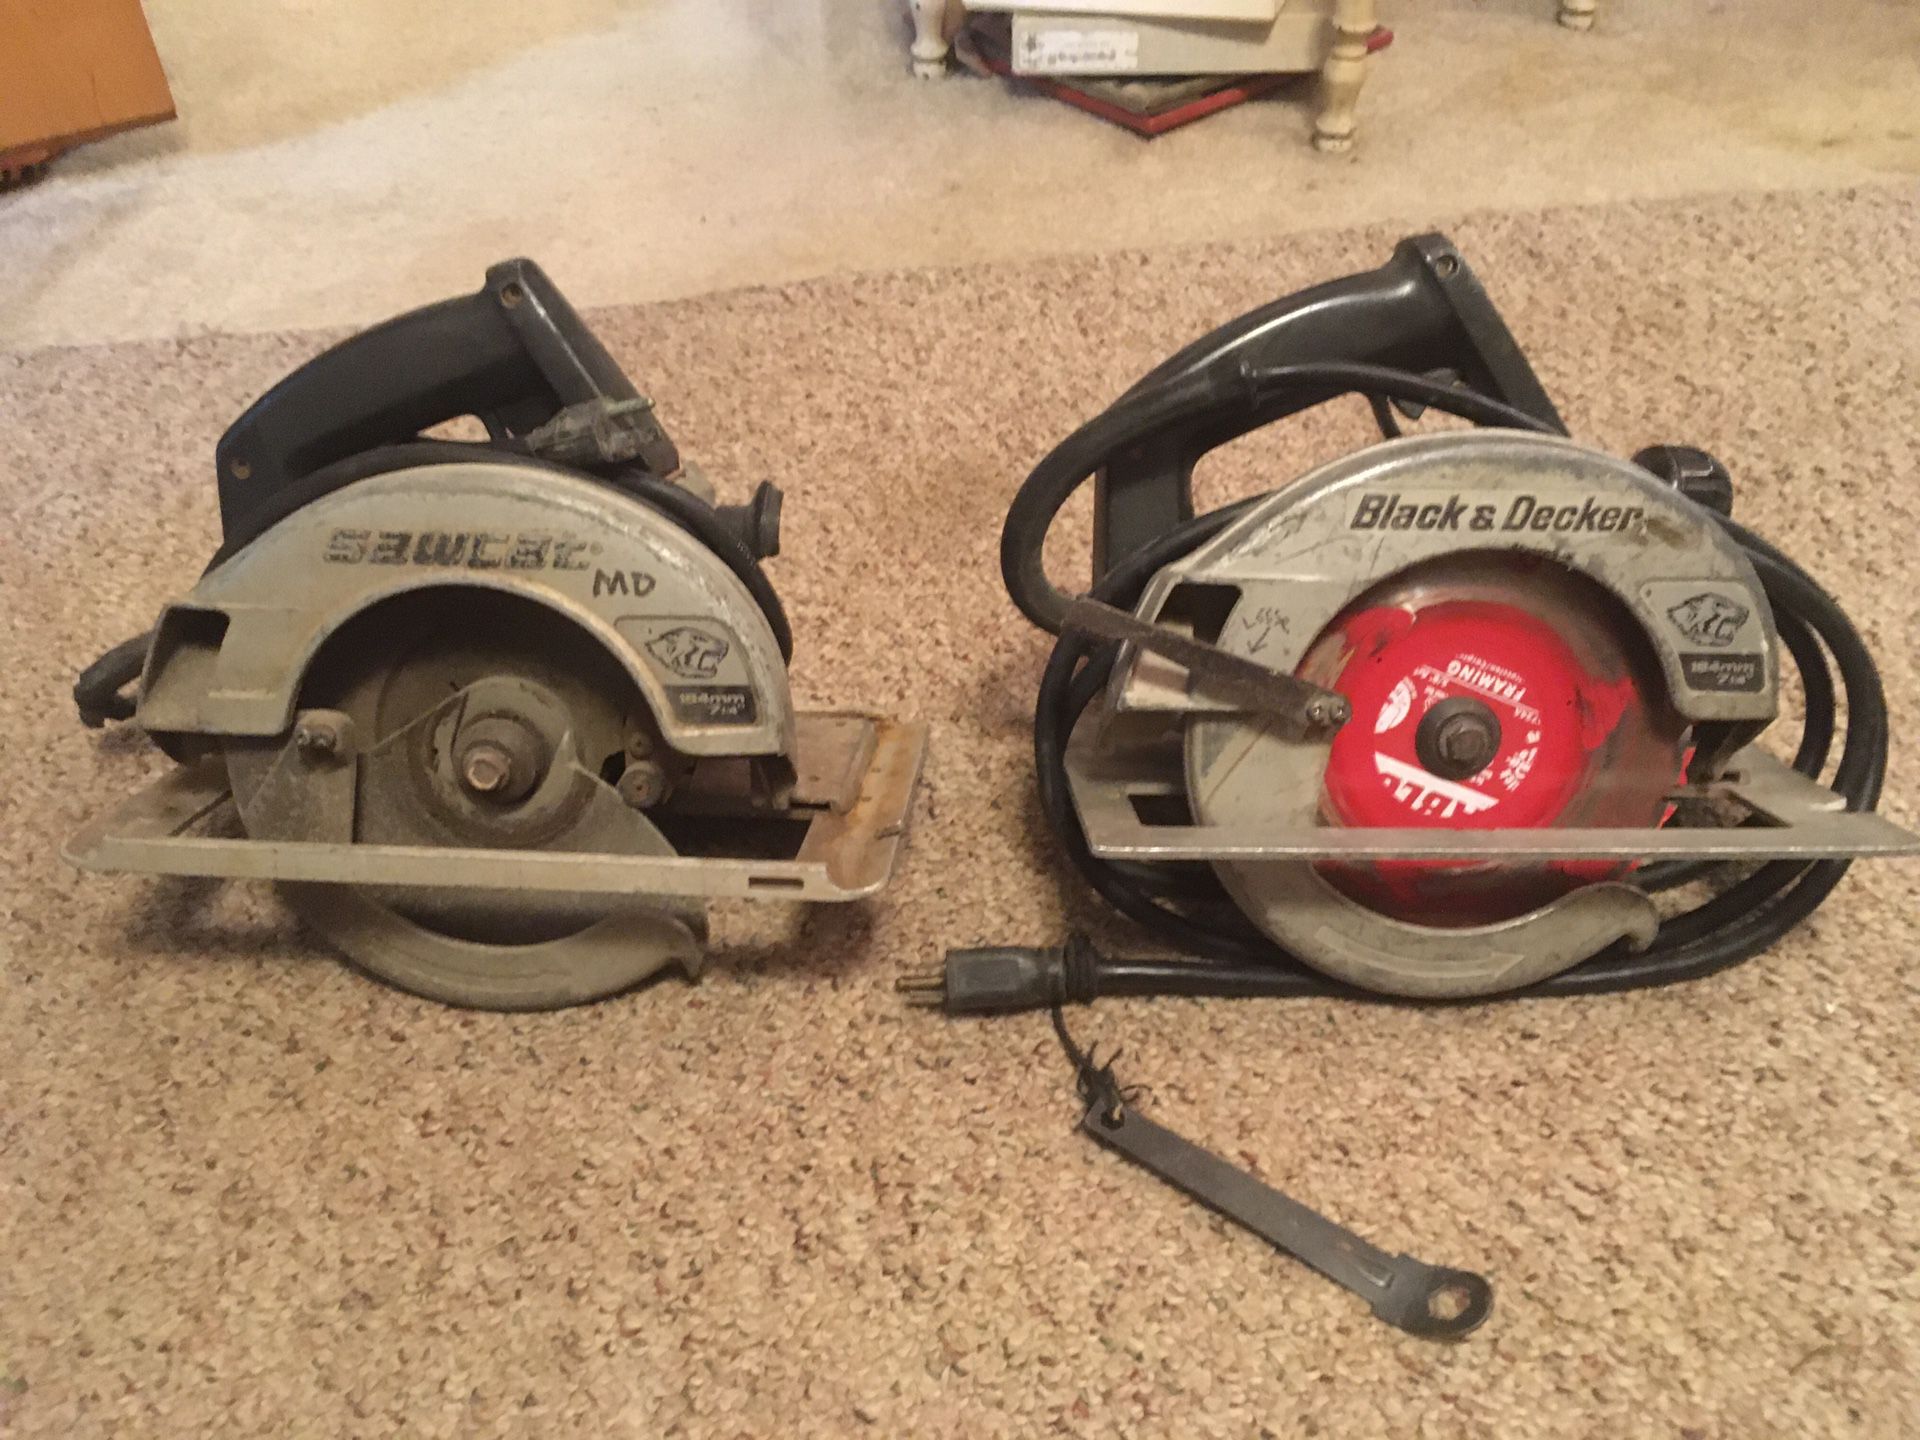 2 saws 7 and 1/4” professional grade